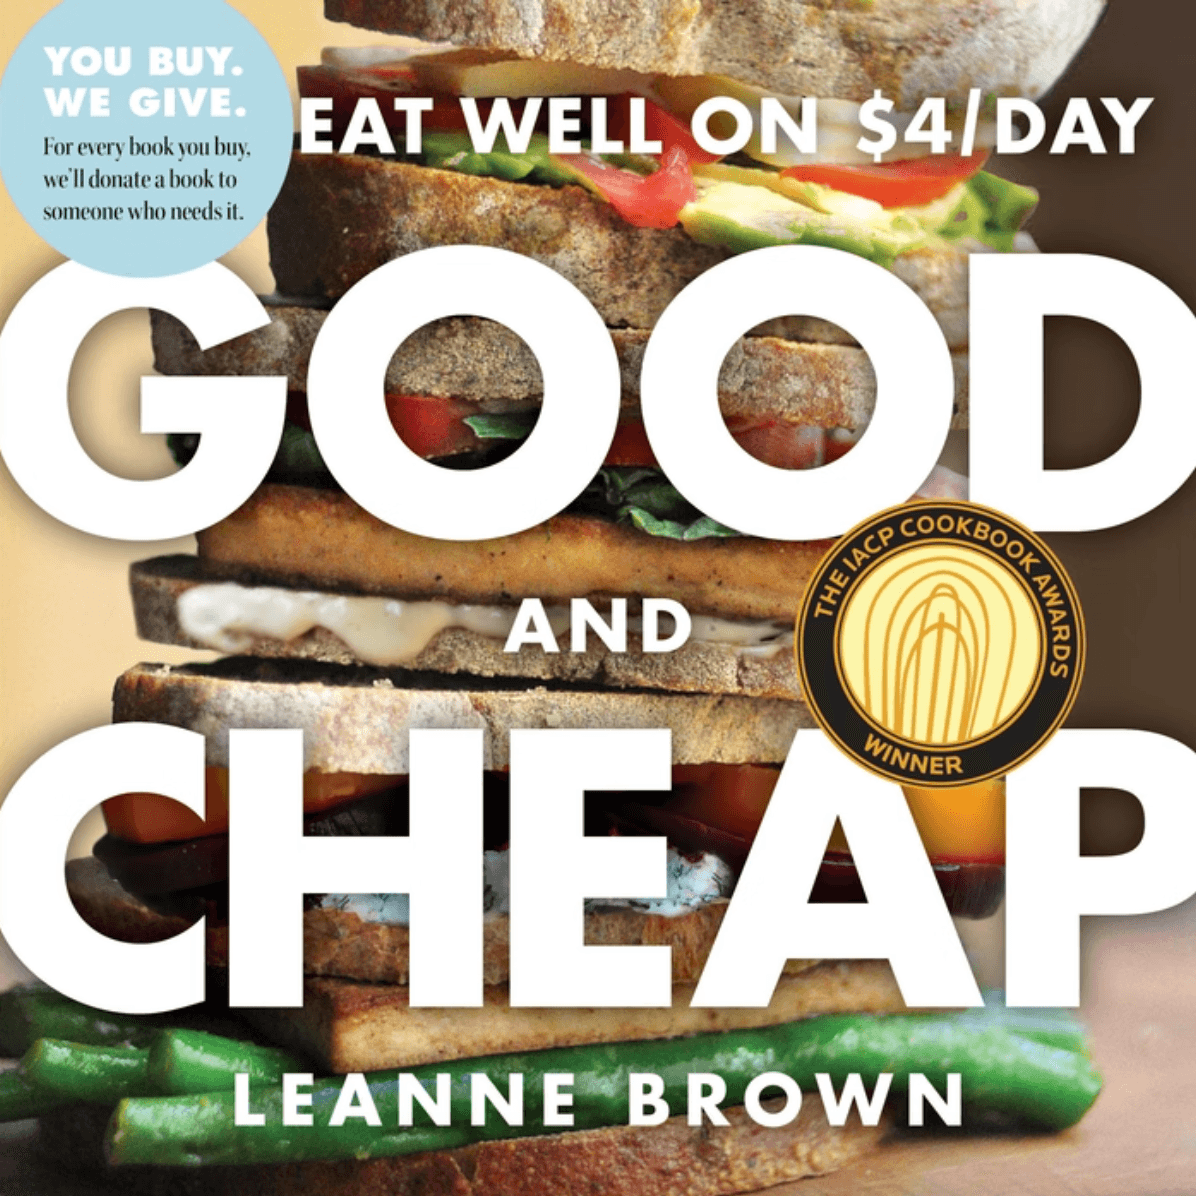 "Good and Cheap" is available for free download as a PDF.